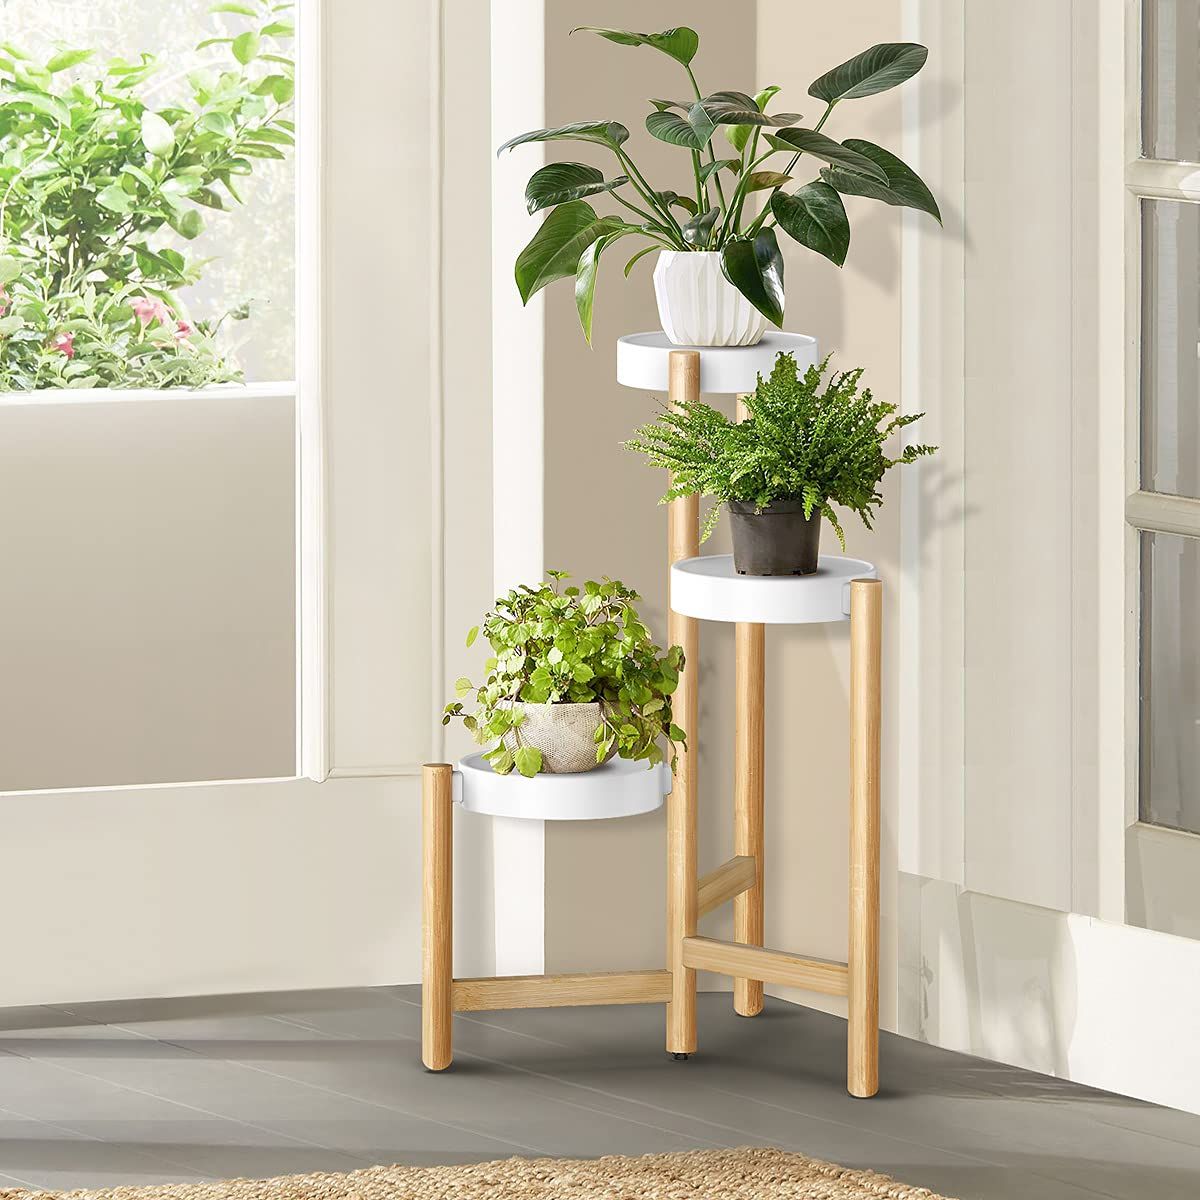 Fashionable Amazon: Adovel Plant Stand For Indoor Plants, 3 Tier Tall Corner Bamboo  Pot Holder – White : Patio, Lawn & Garden Regarding Three Tier Plant Stands (View 2 of 10)